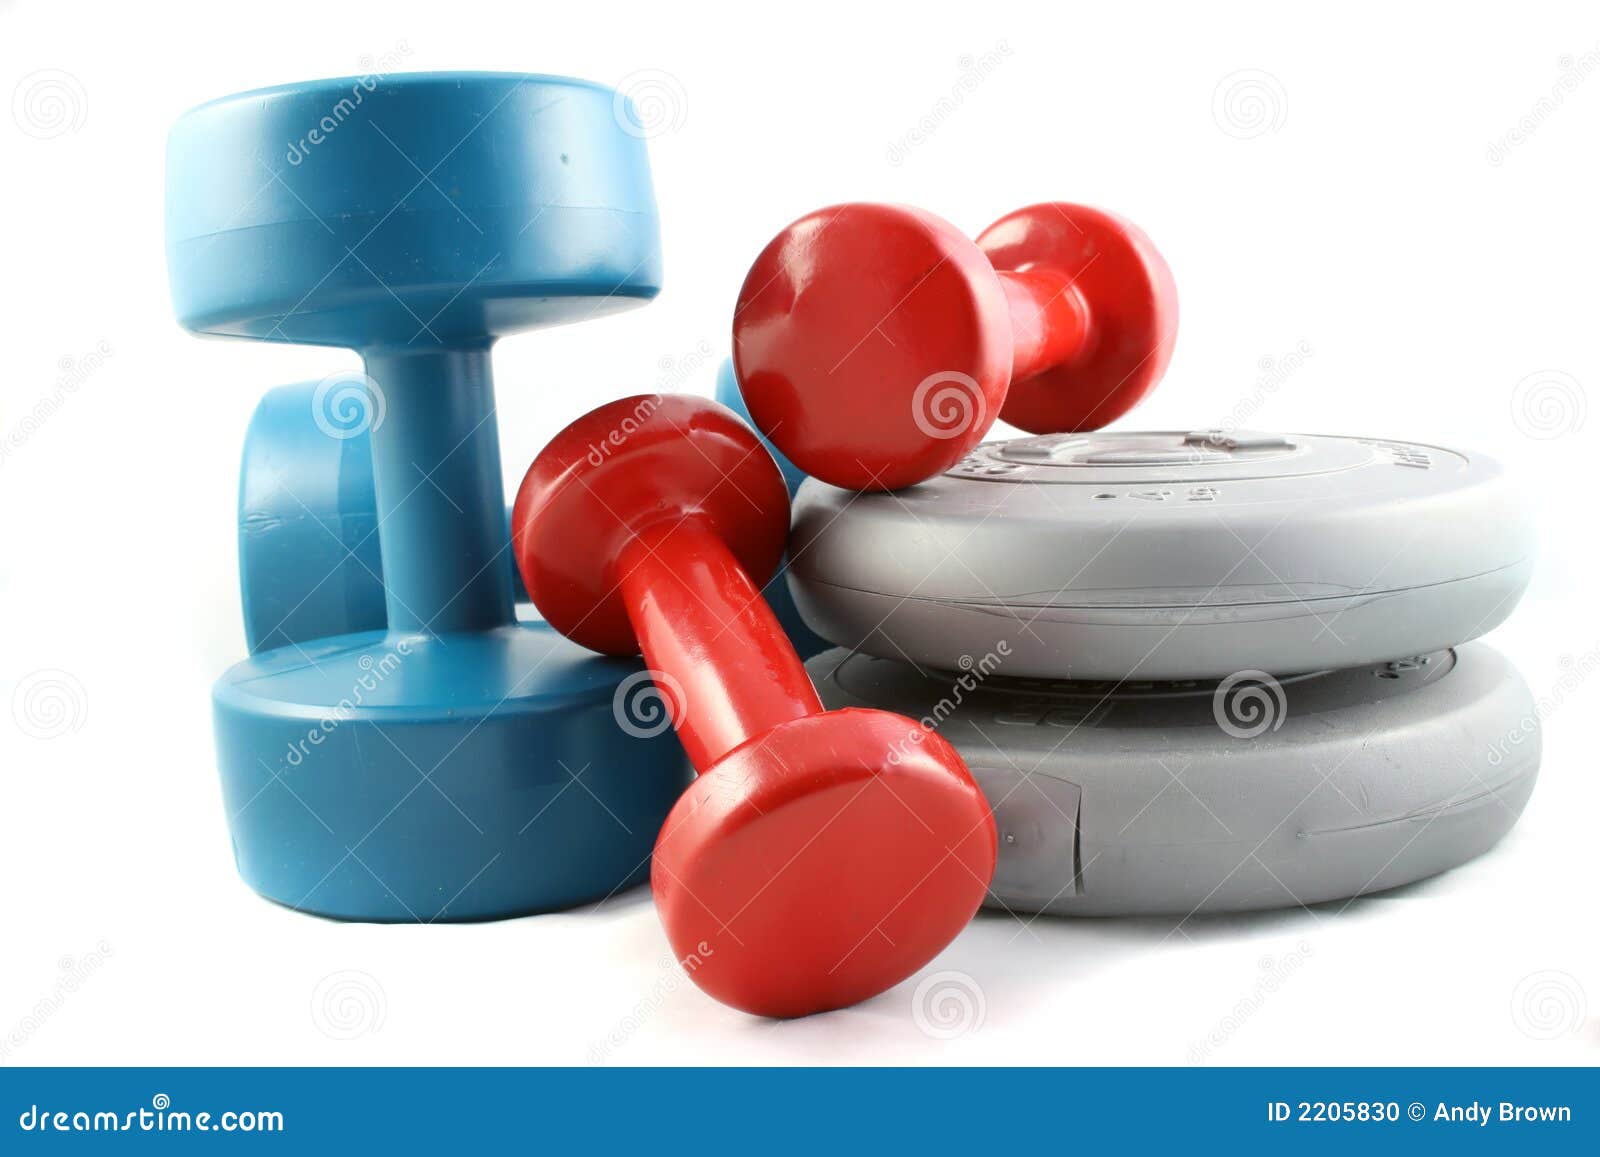 dumbbells and free weights